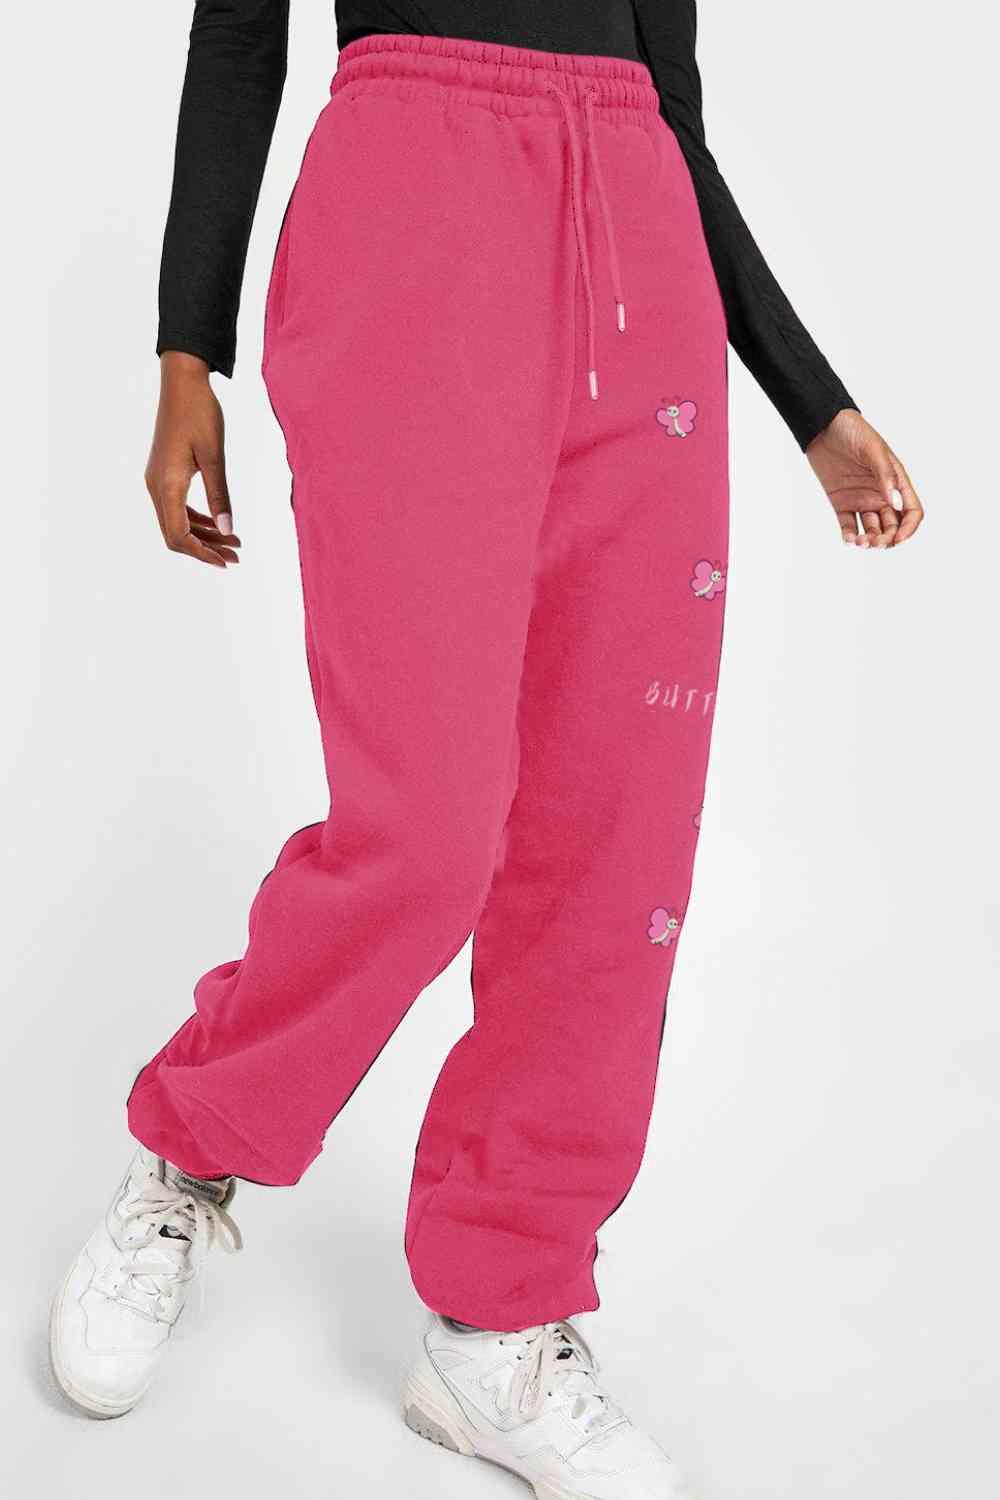 Simply Love Simply Love Full Size Drawstring BUTTERFLY Graphic Long Sweatpants - Immenzive